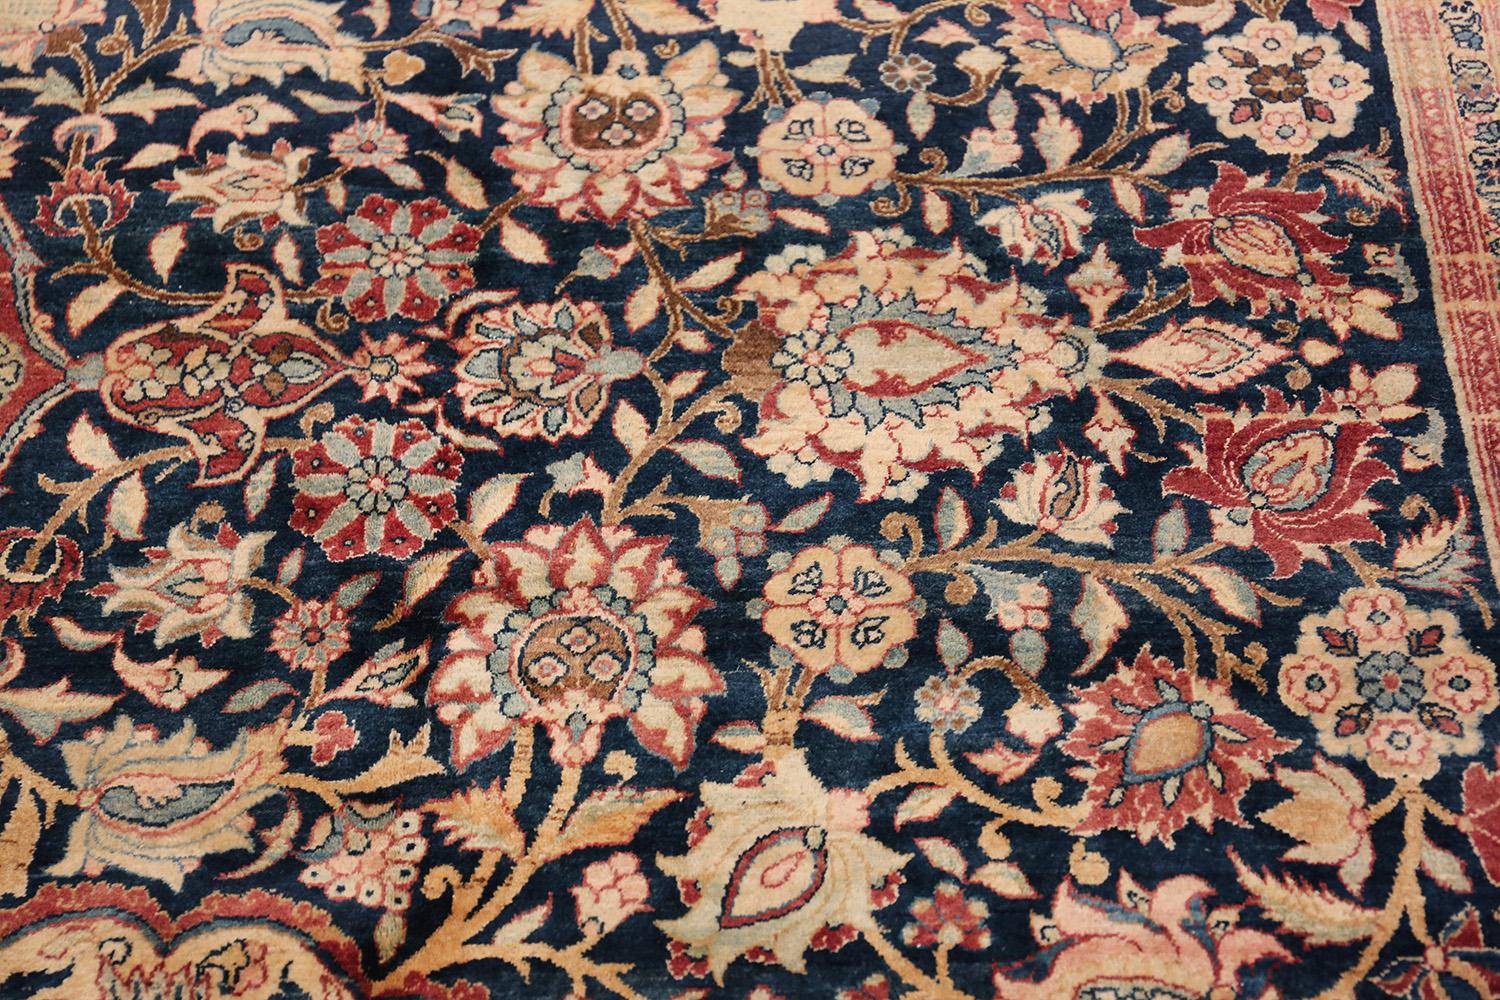 Oversized Antique Tehran Persian Carpet. Size: 14 ft 3 in x 22 ft 3 in 3